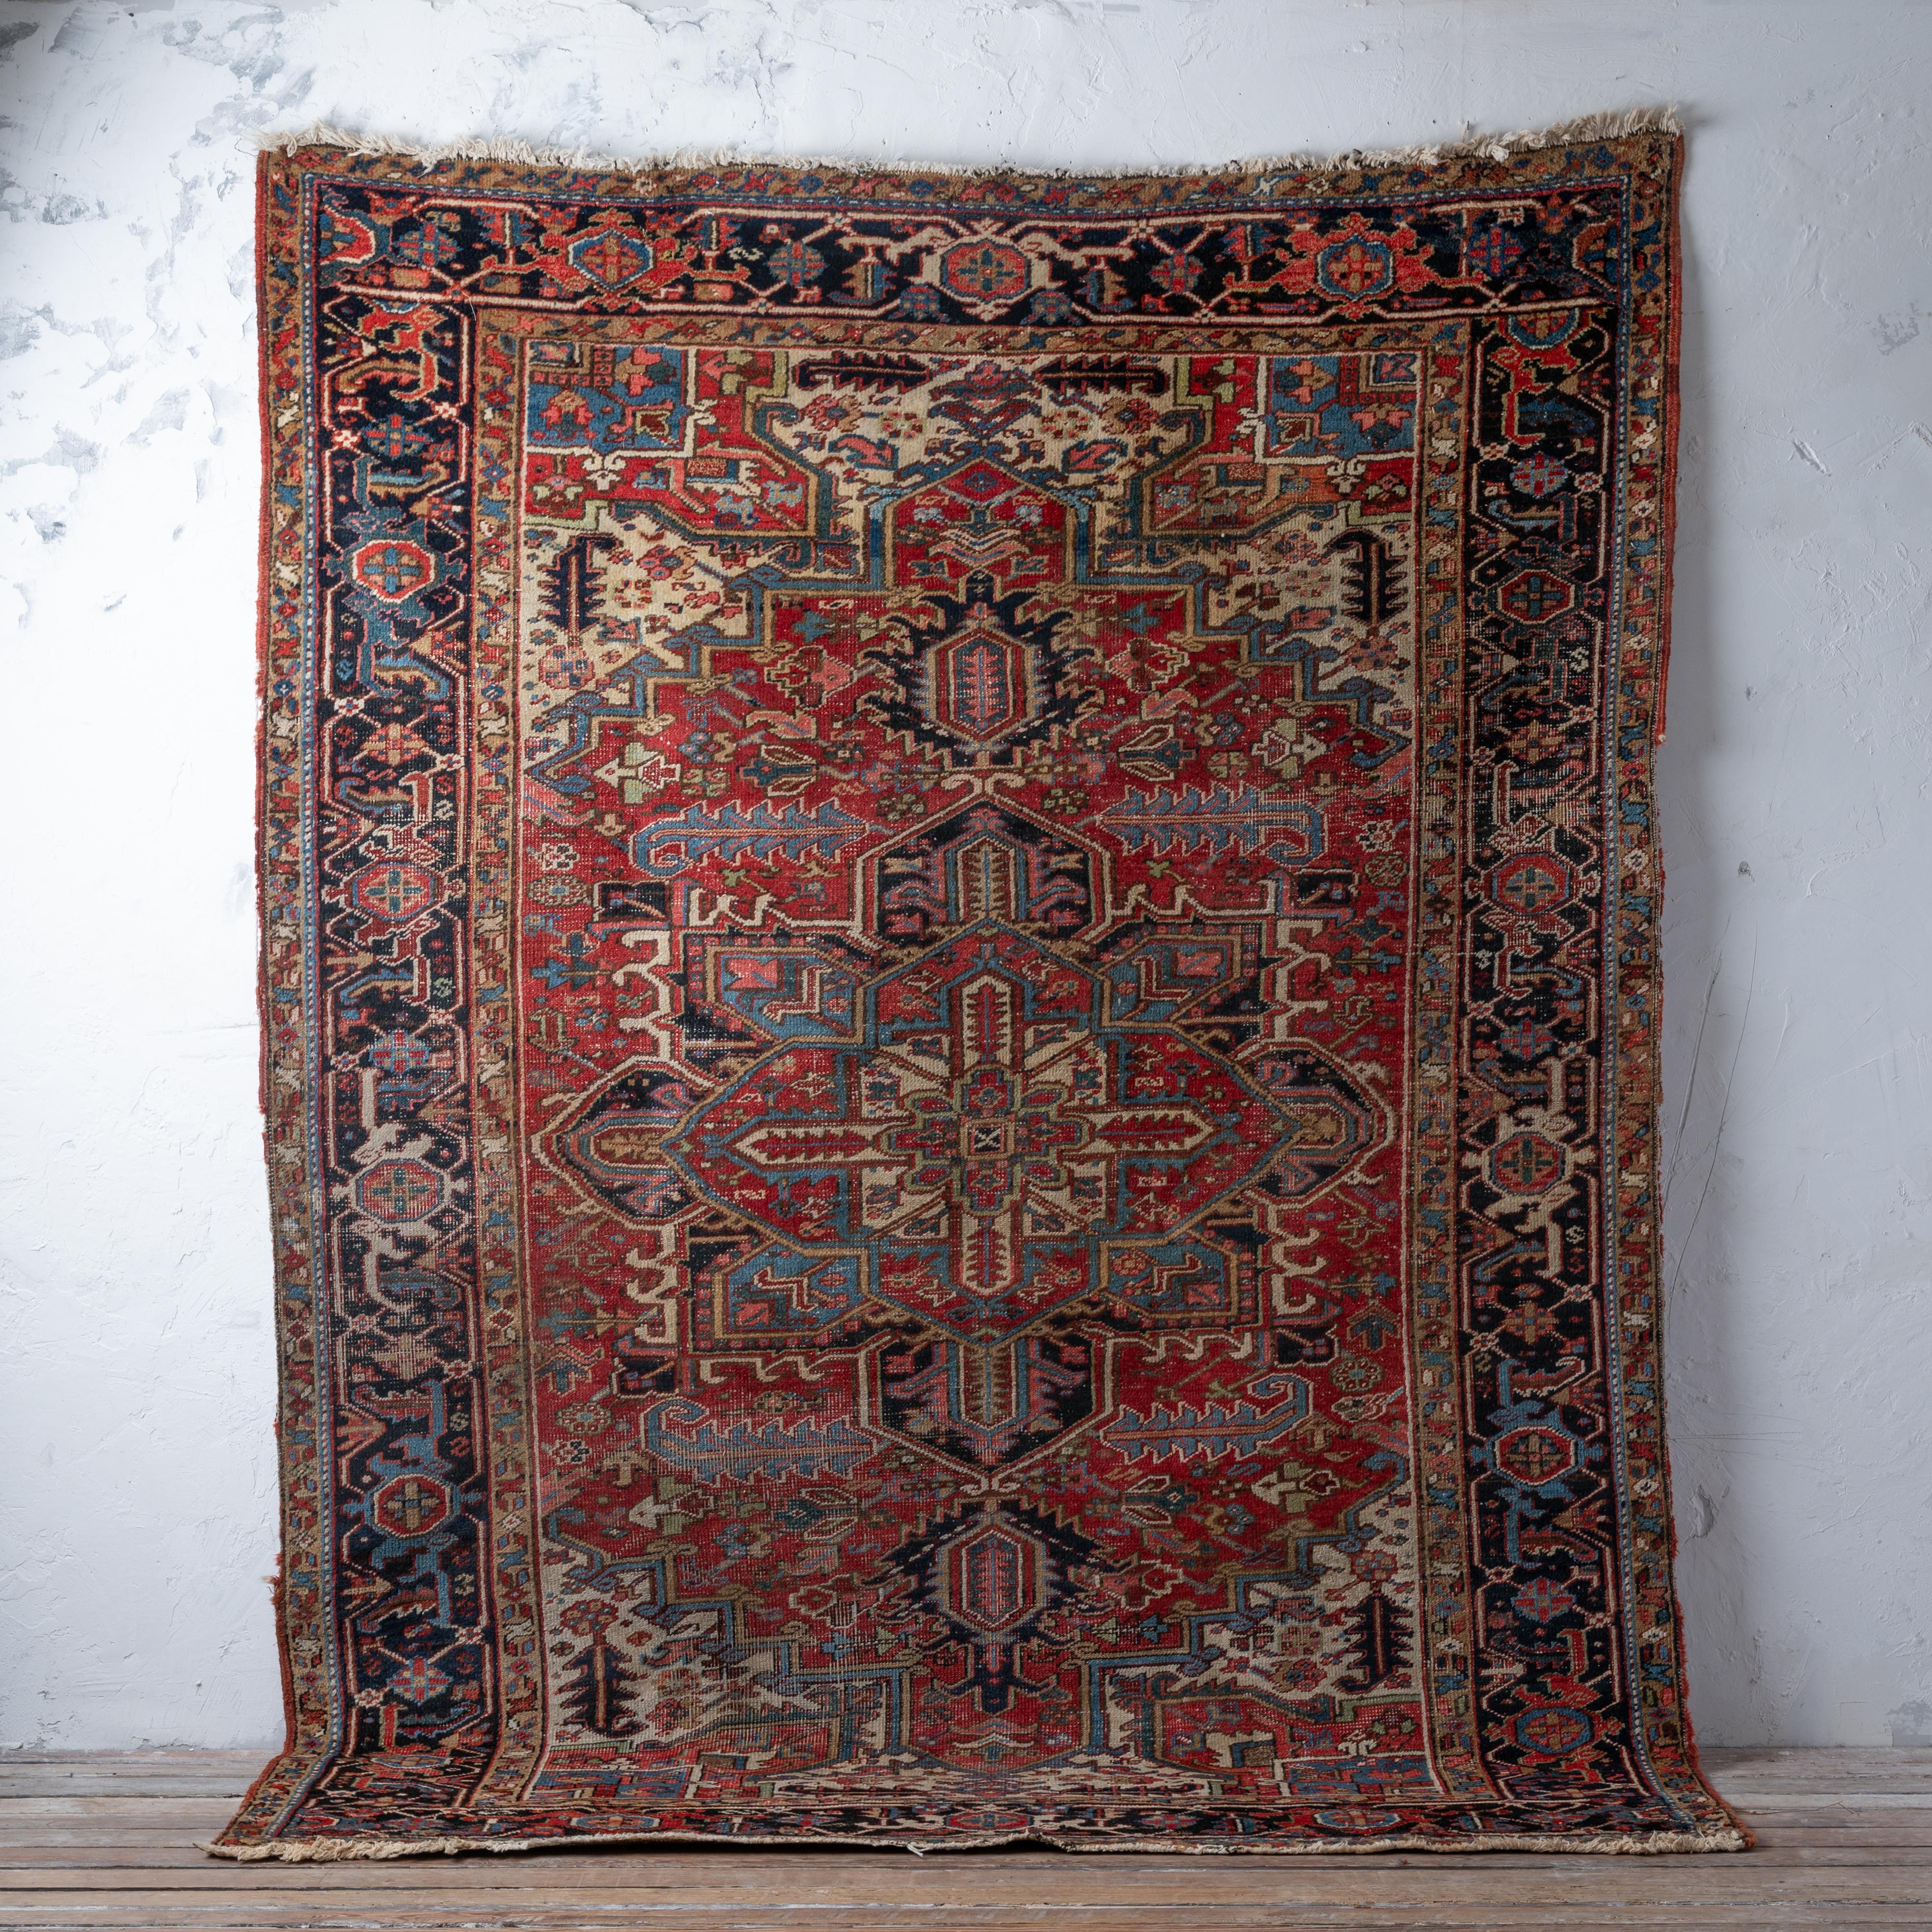 A Persian Heriz rug, circa 1920s.

76 by 105 inches


